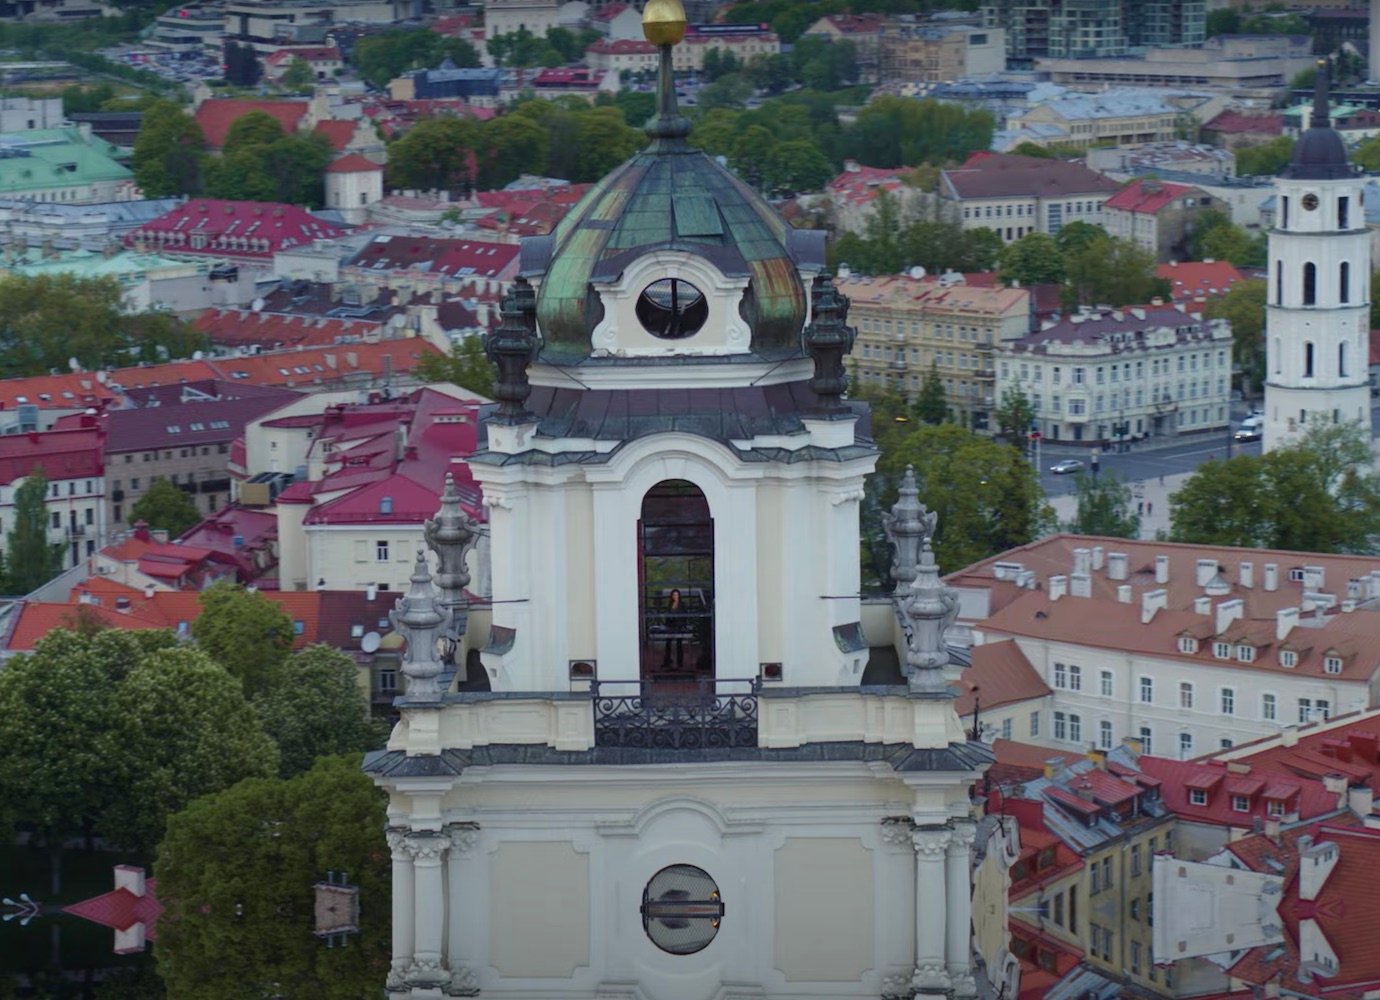 Listen to a 1-hour dark disco DJ set from a bell tower above Vilnius’ Old Town